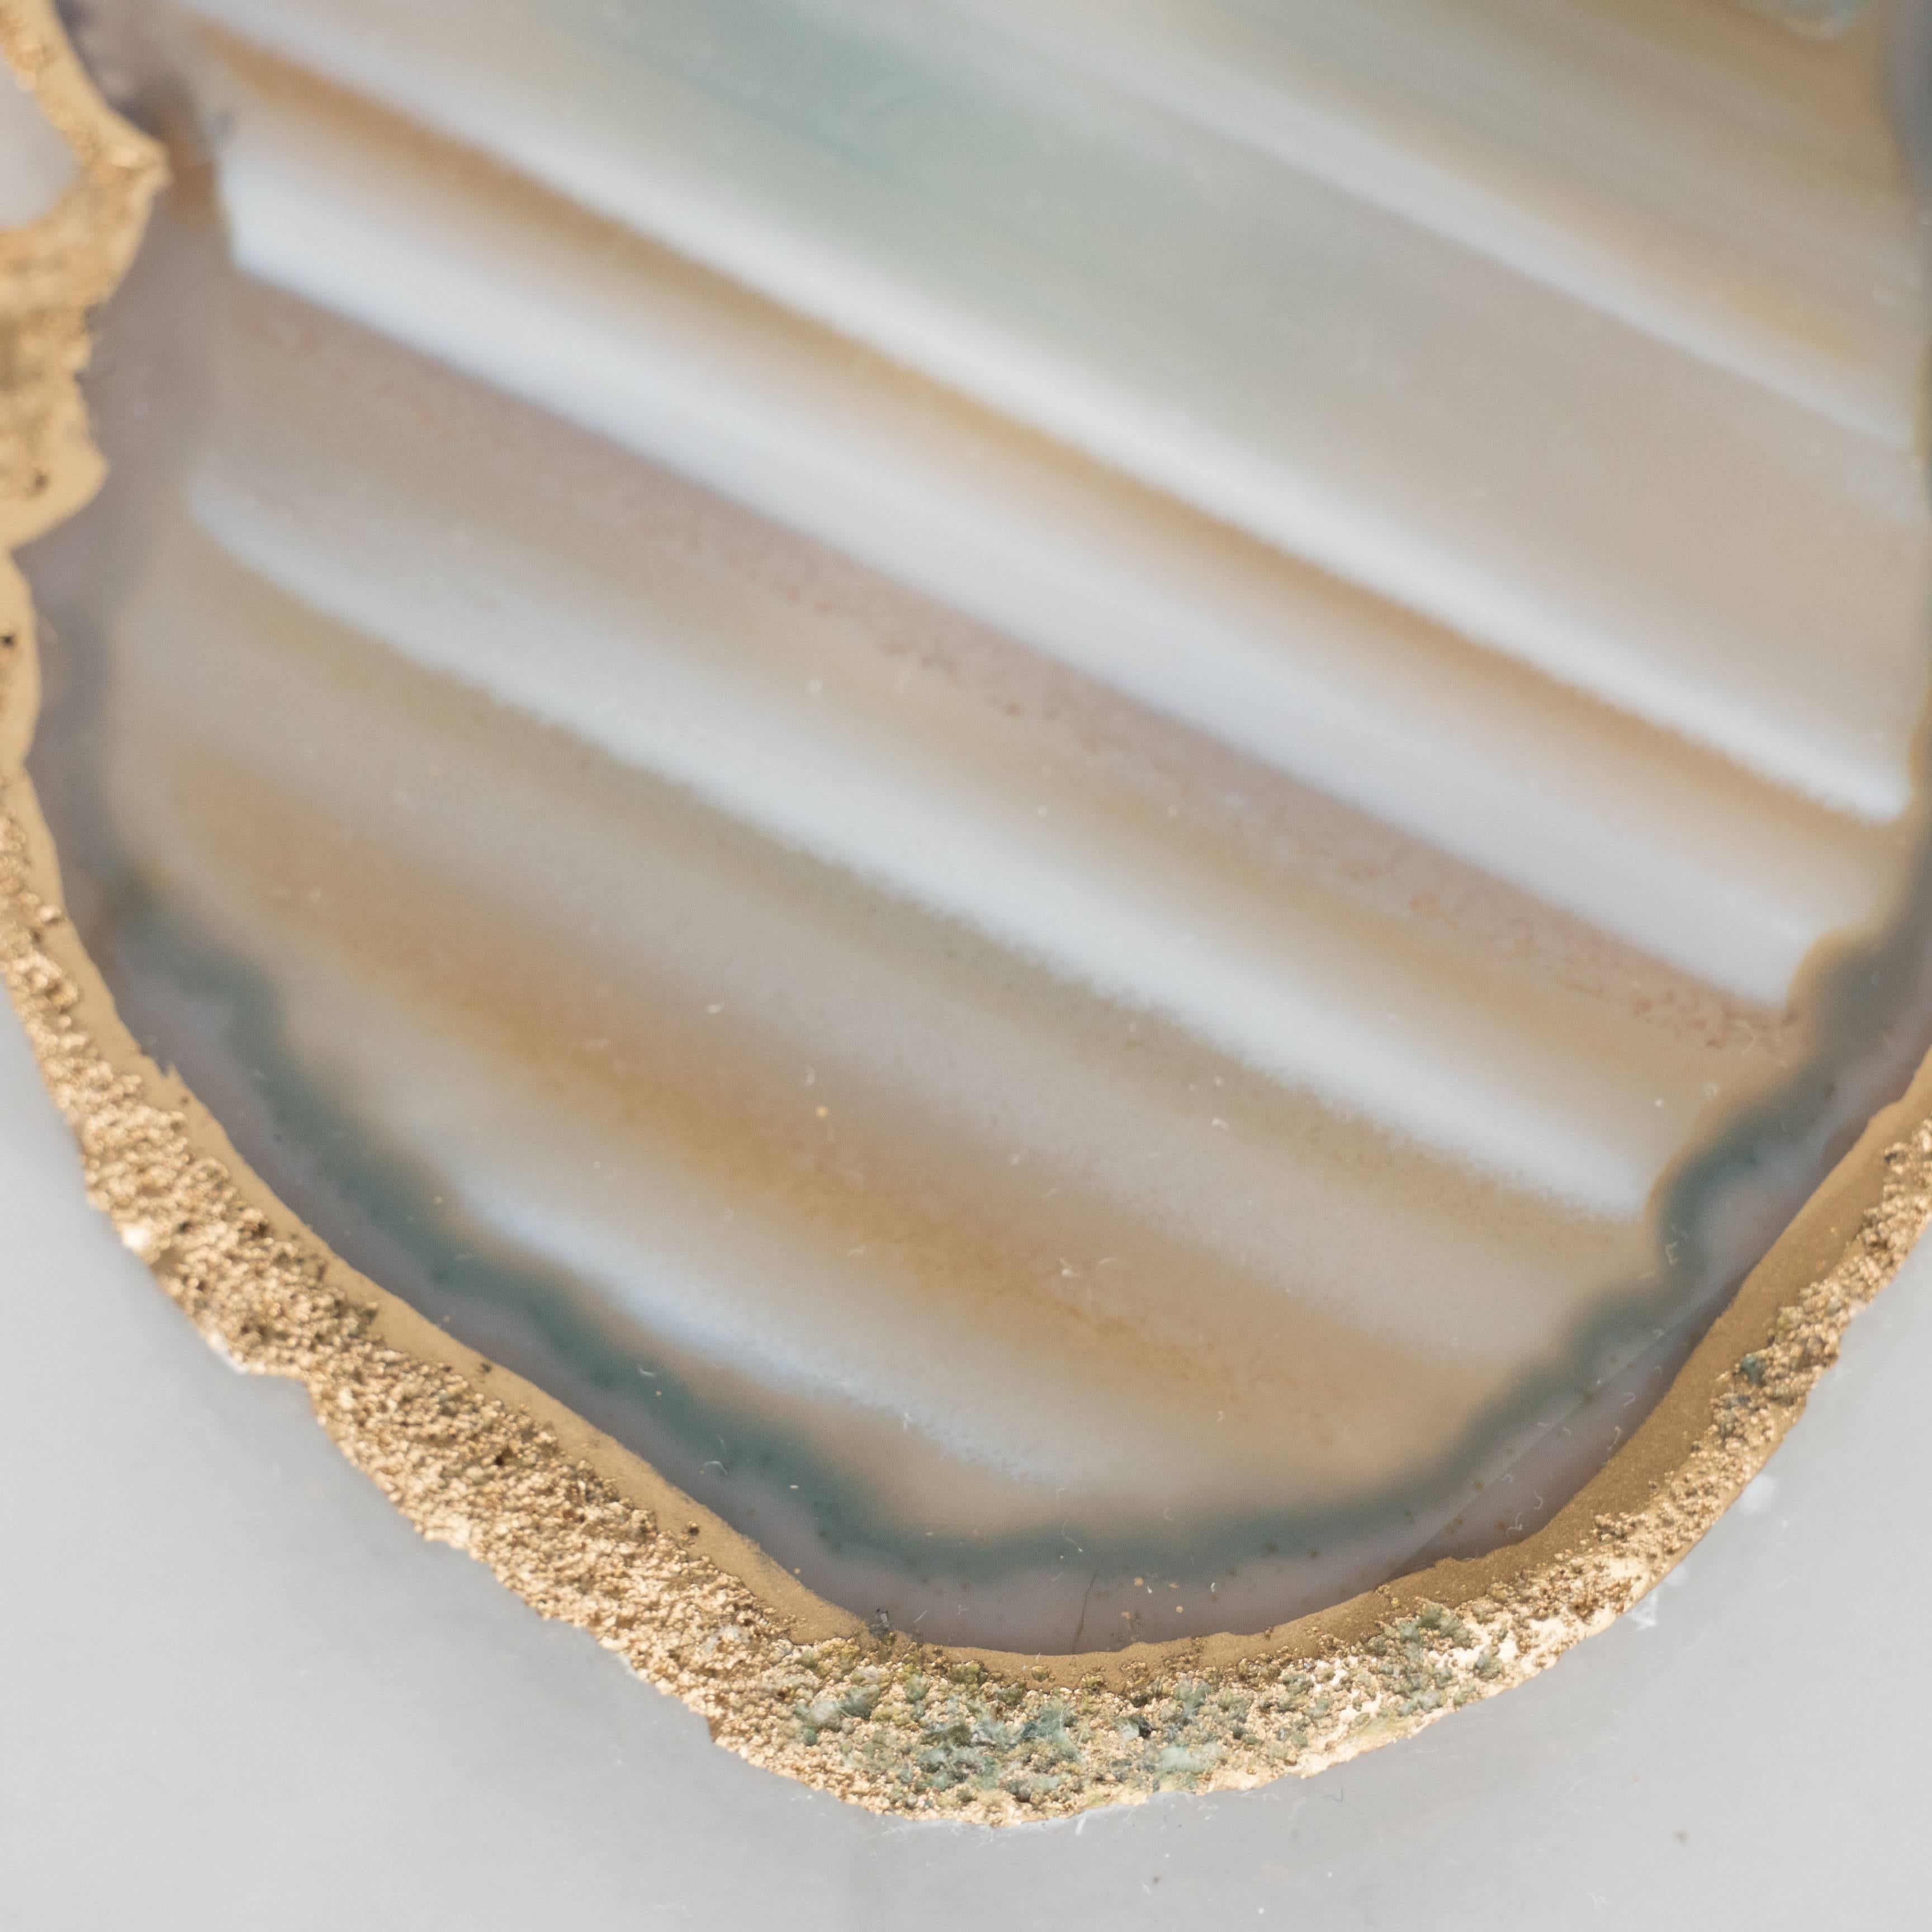 20th Century Modernist Organic Sliced Agate and Lucite Desk Tray or Catch All